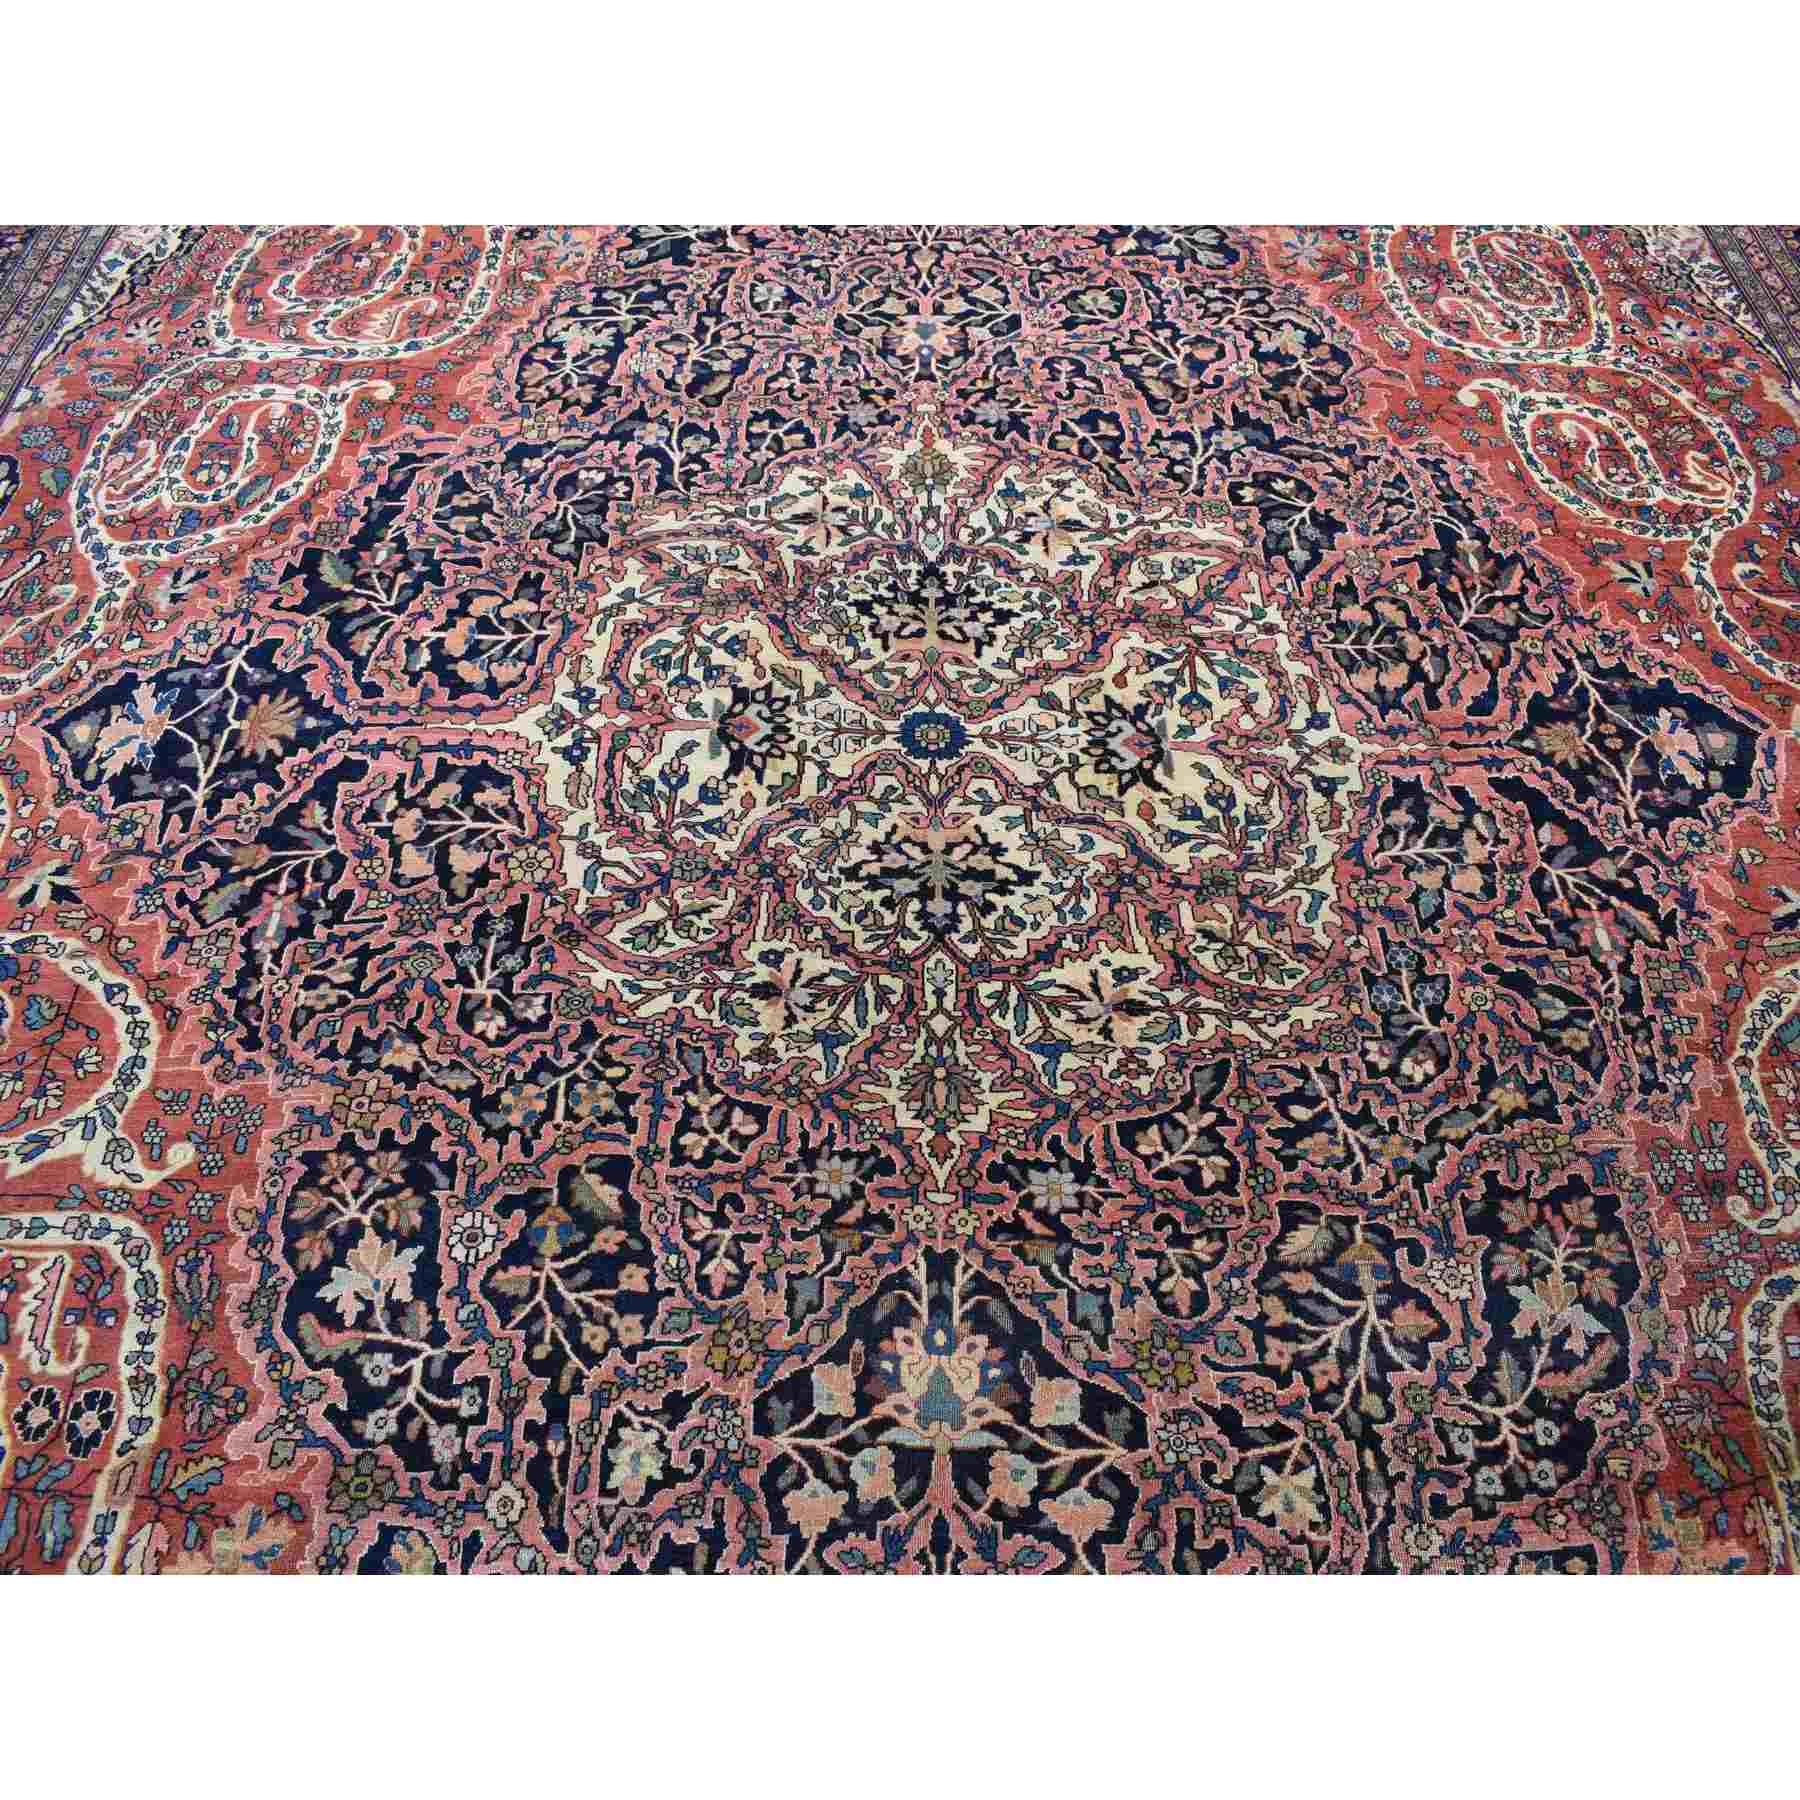 Antique-Hand-Knotted-Rug-403495